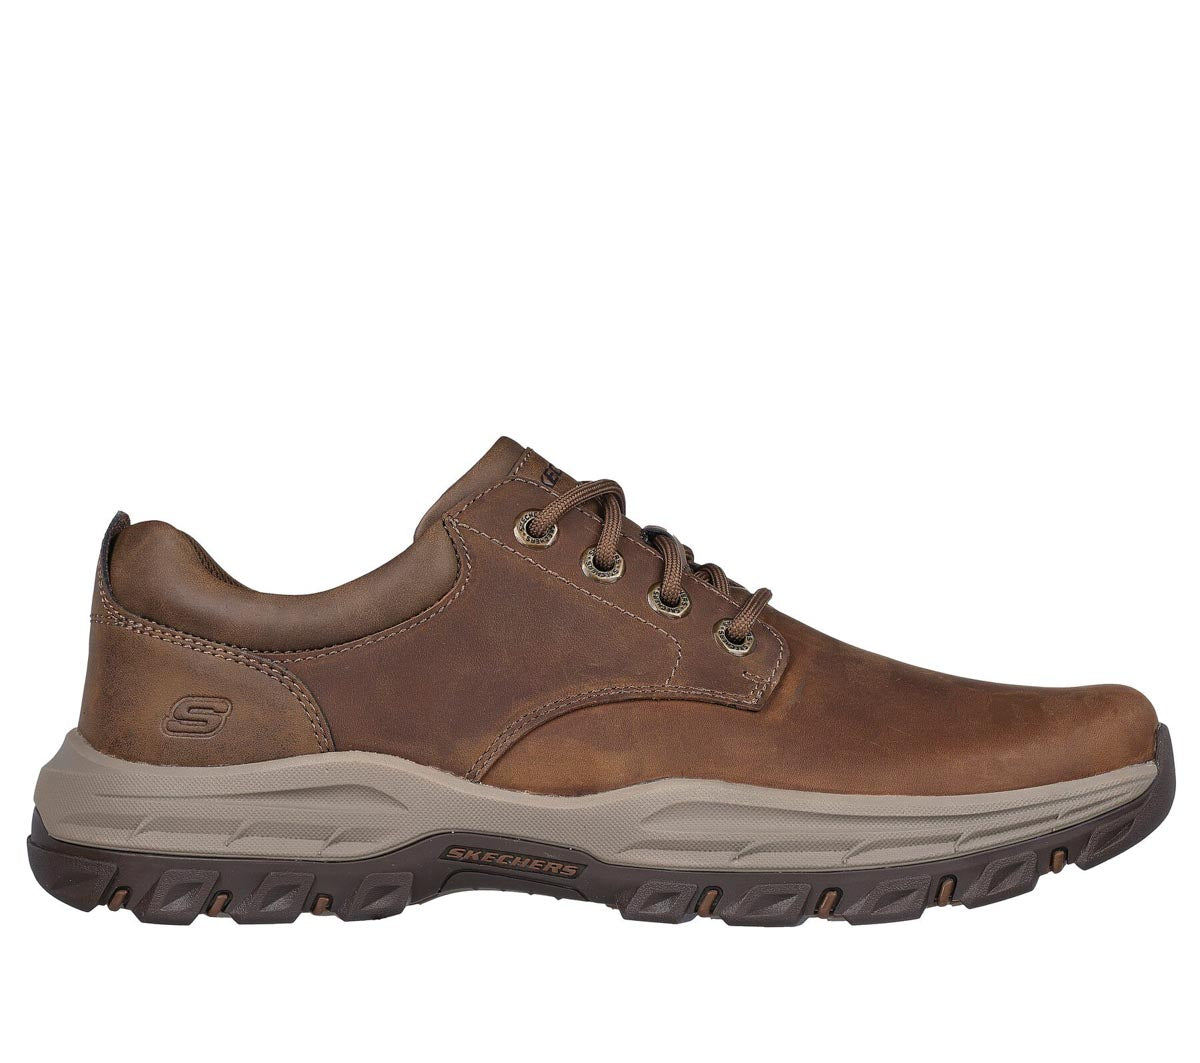     Front view of Skechers Knowlson - Leland brown leather lace-up shoes.